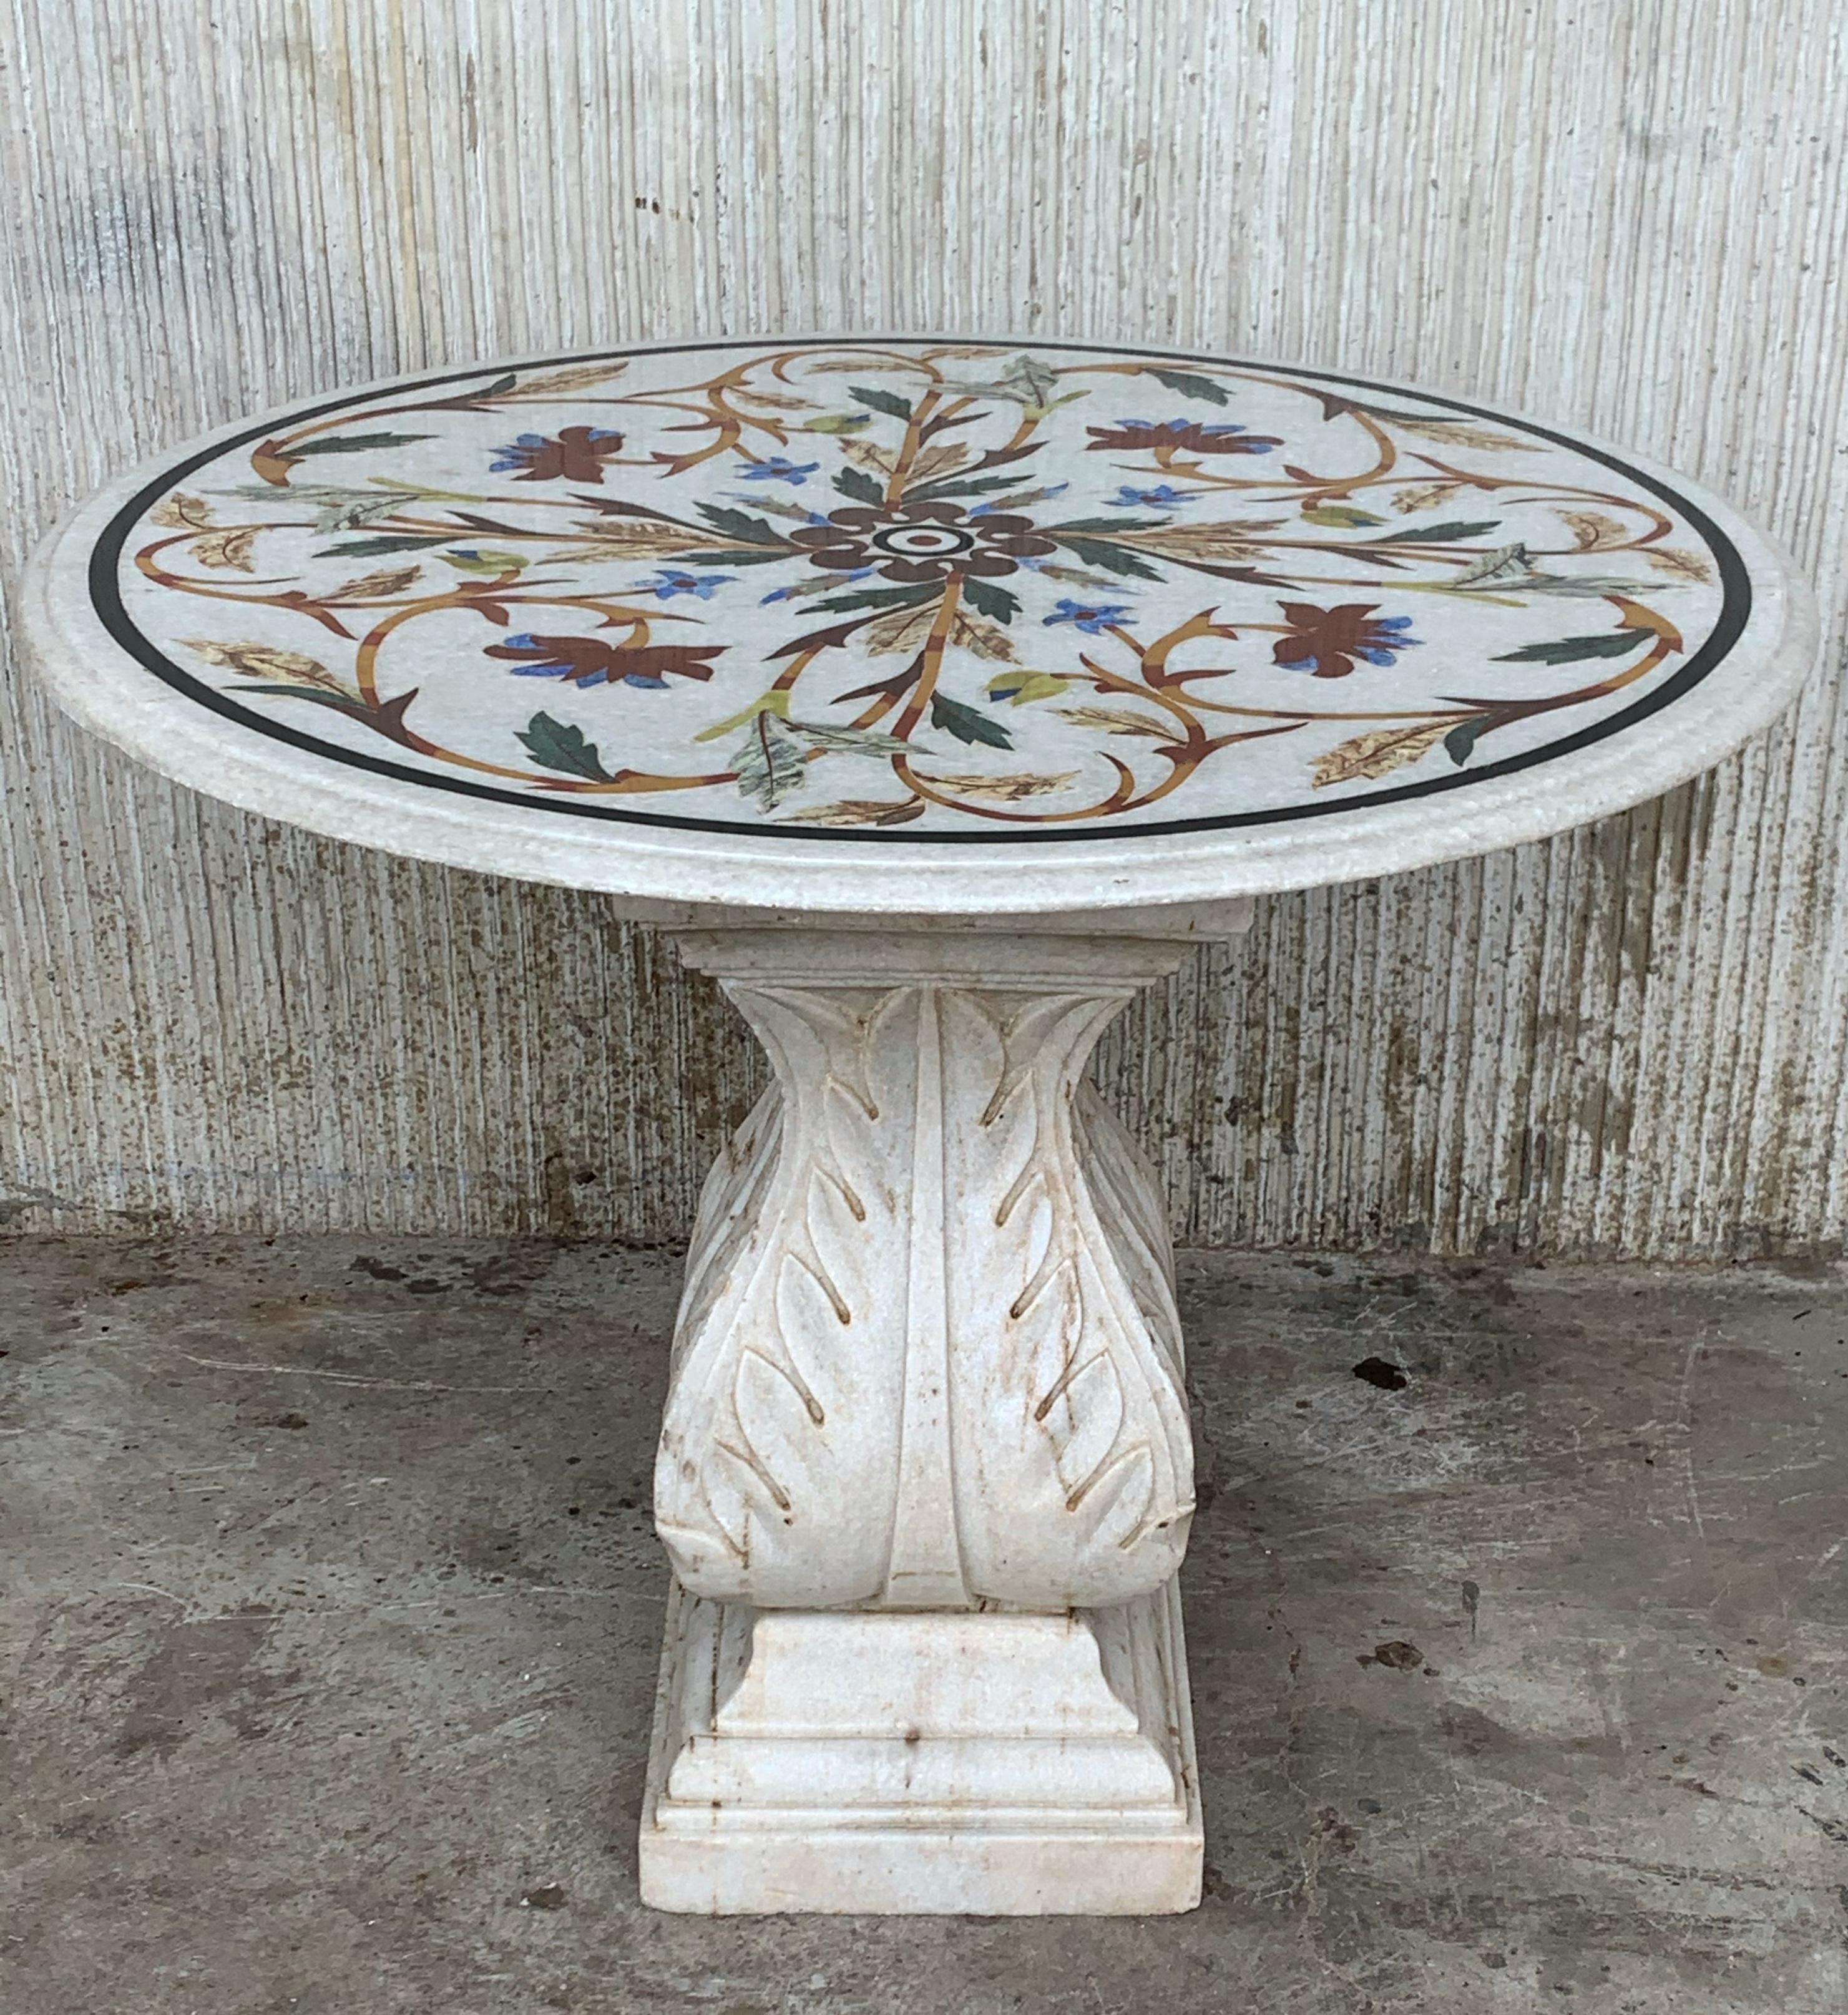 19th Century 18th Century Italian Pietra Dura Marble-Top Table with Carved Carrara Pedestal